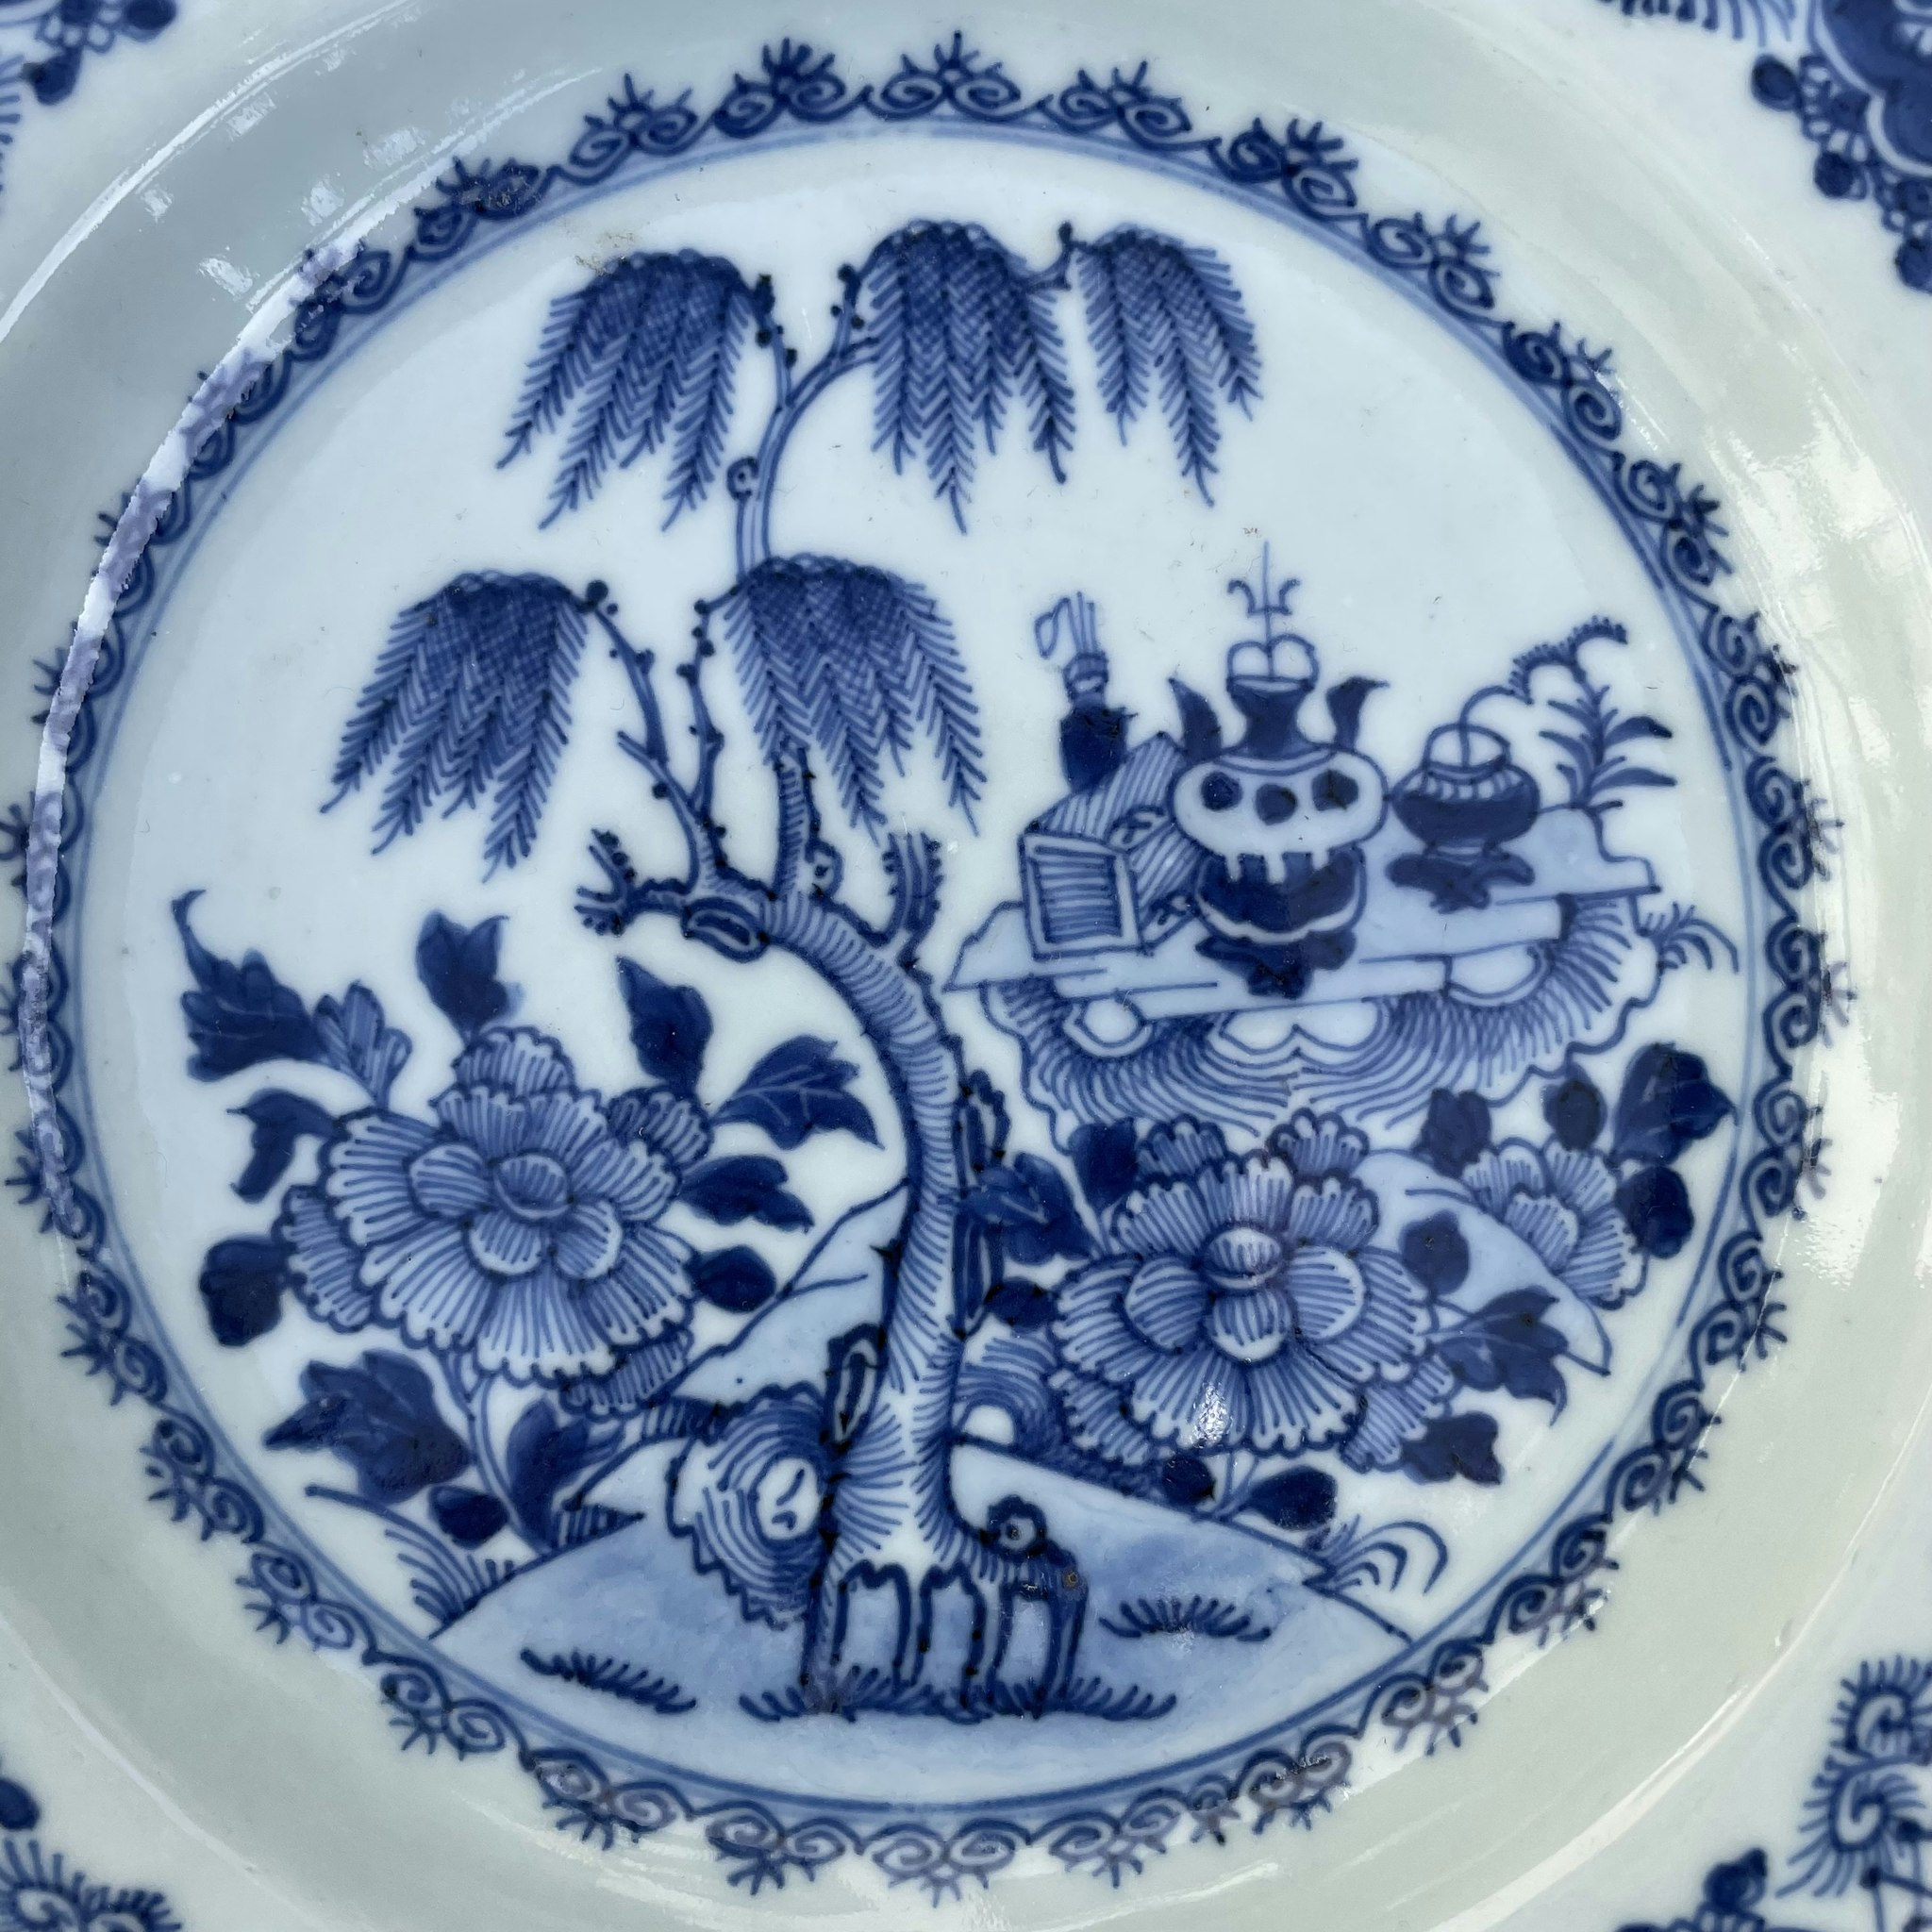 Chinese Antique blue and white porcelain plate 18th C Qianlong period #1635